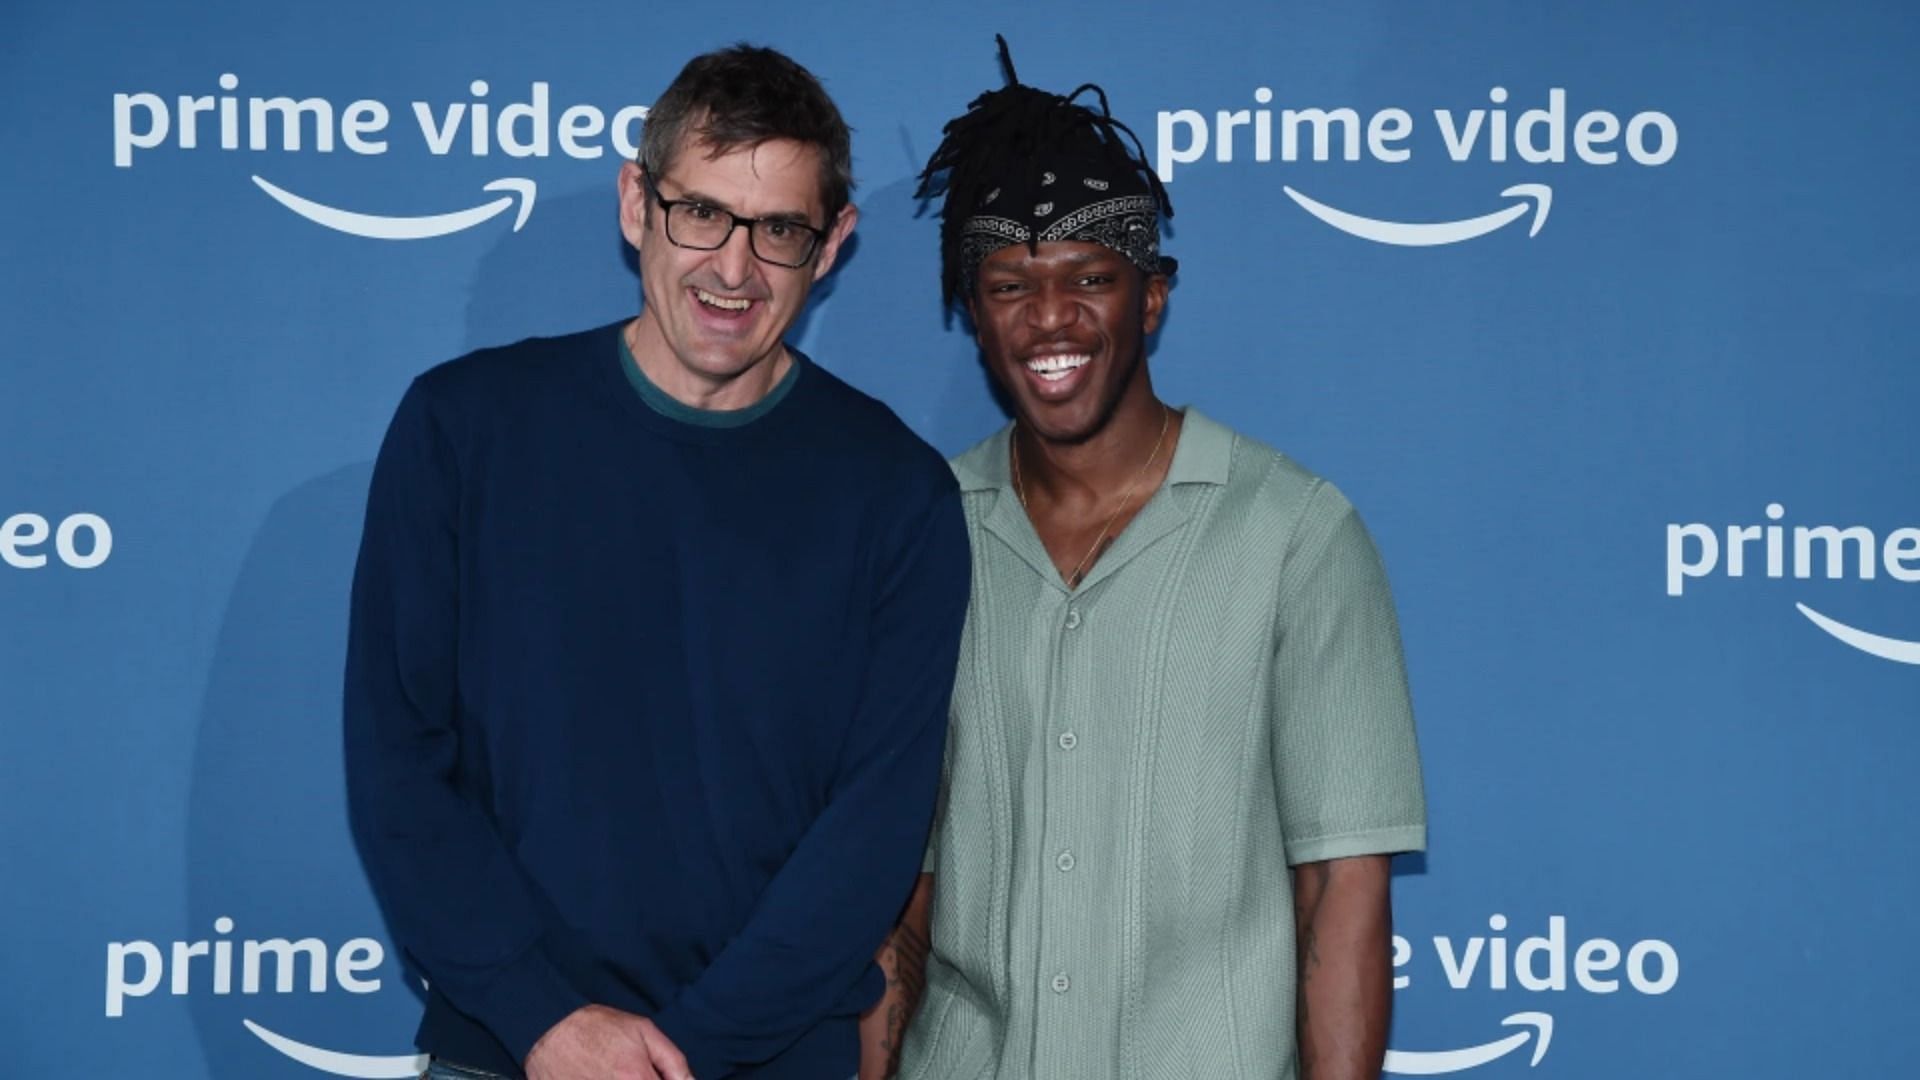 KSI reveals at Amazon Prime Presents that his Amazon Prime documentary will delve into his therapy sessions (Image via Prime Video)